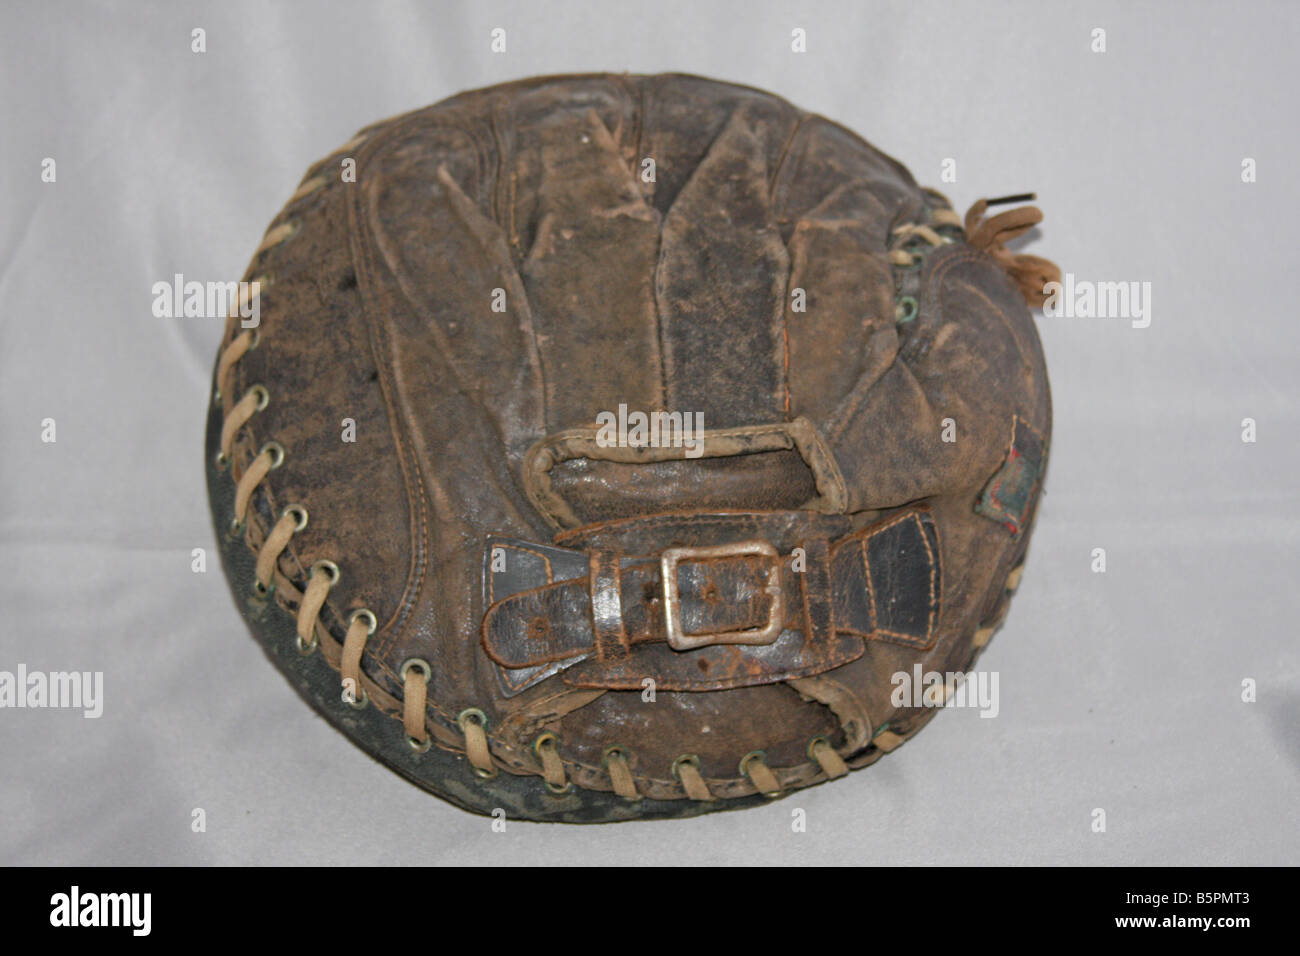 Old time catcher's mitt that would be a treasure for any sports memorabilia collector. Stock Photo